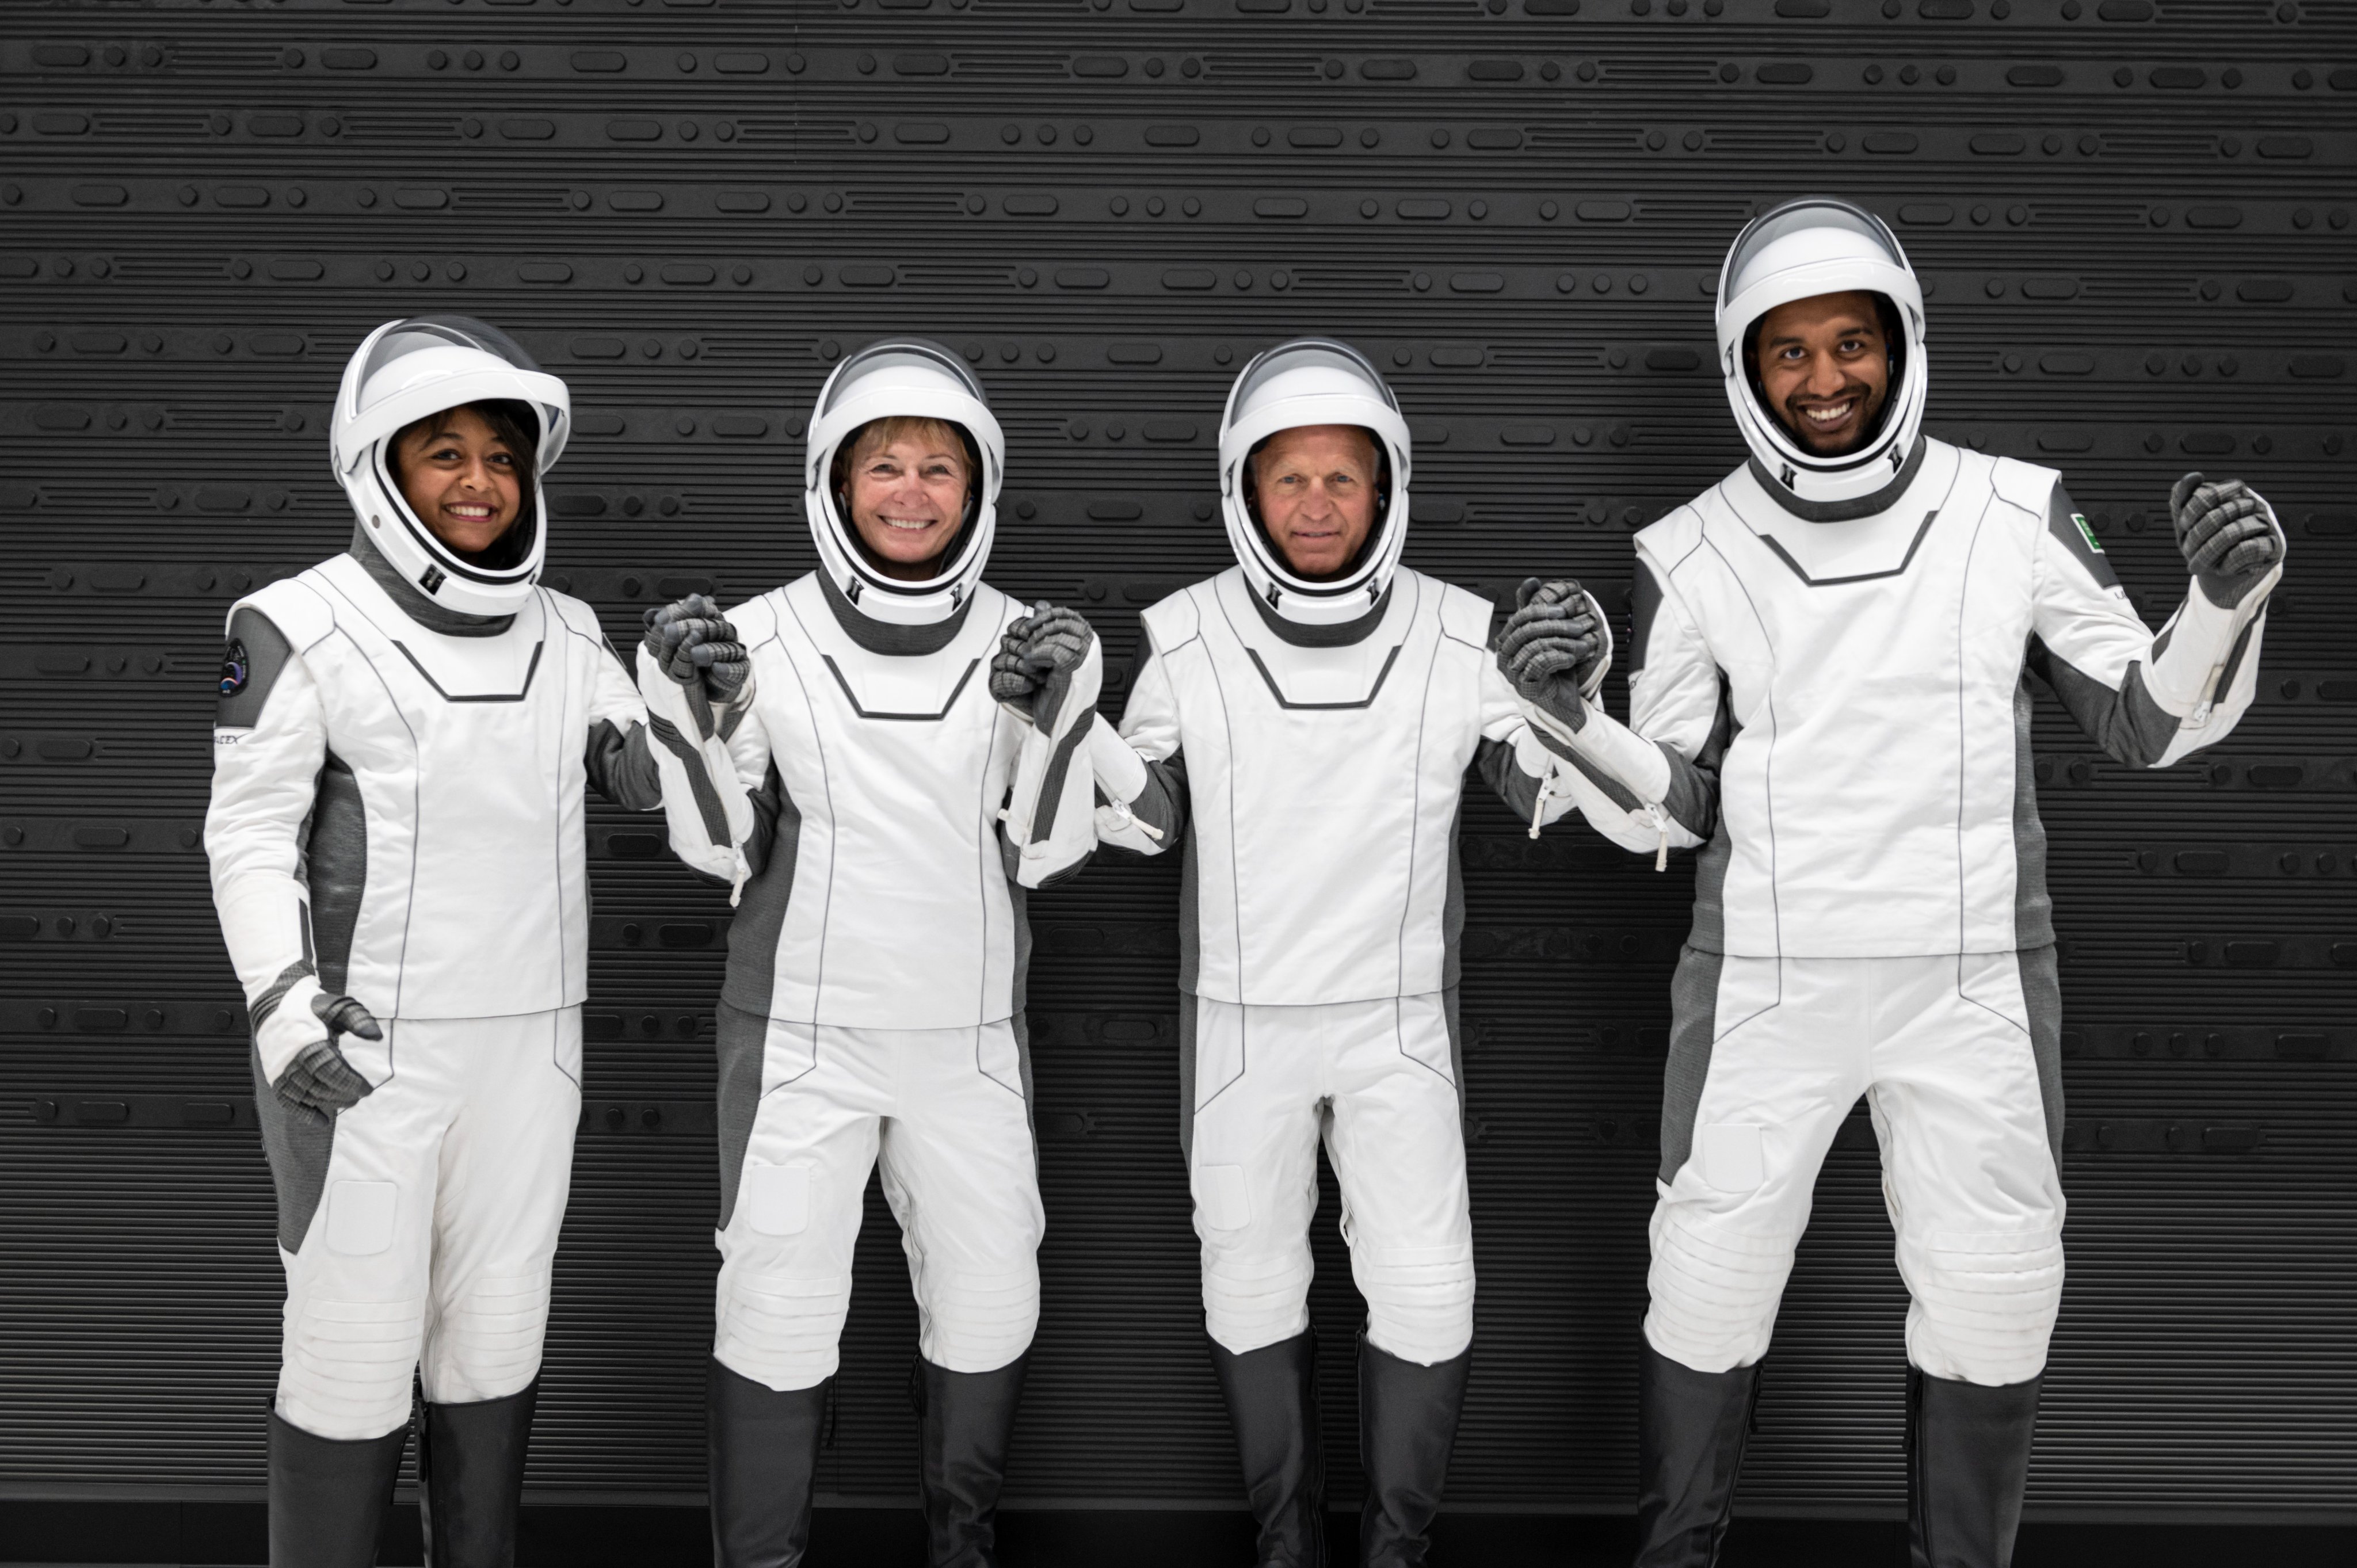 The Axiom Space Ax-2 private astronaut crew in their SpaceX spacesuits